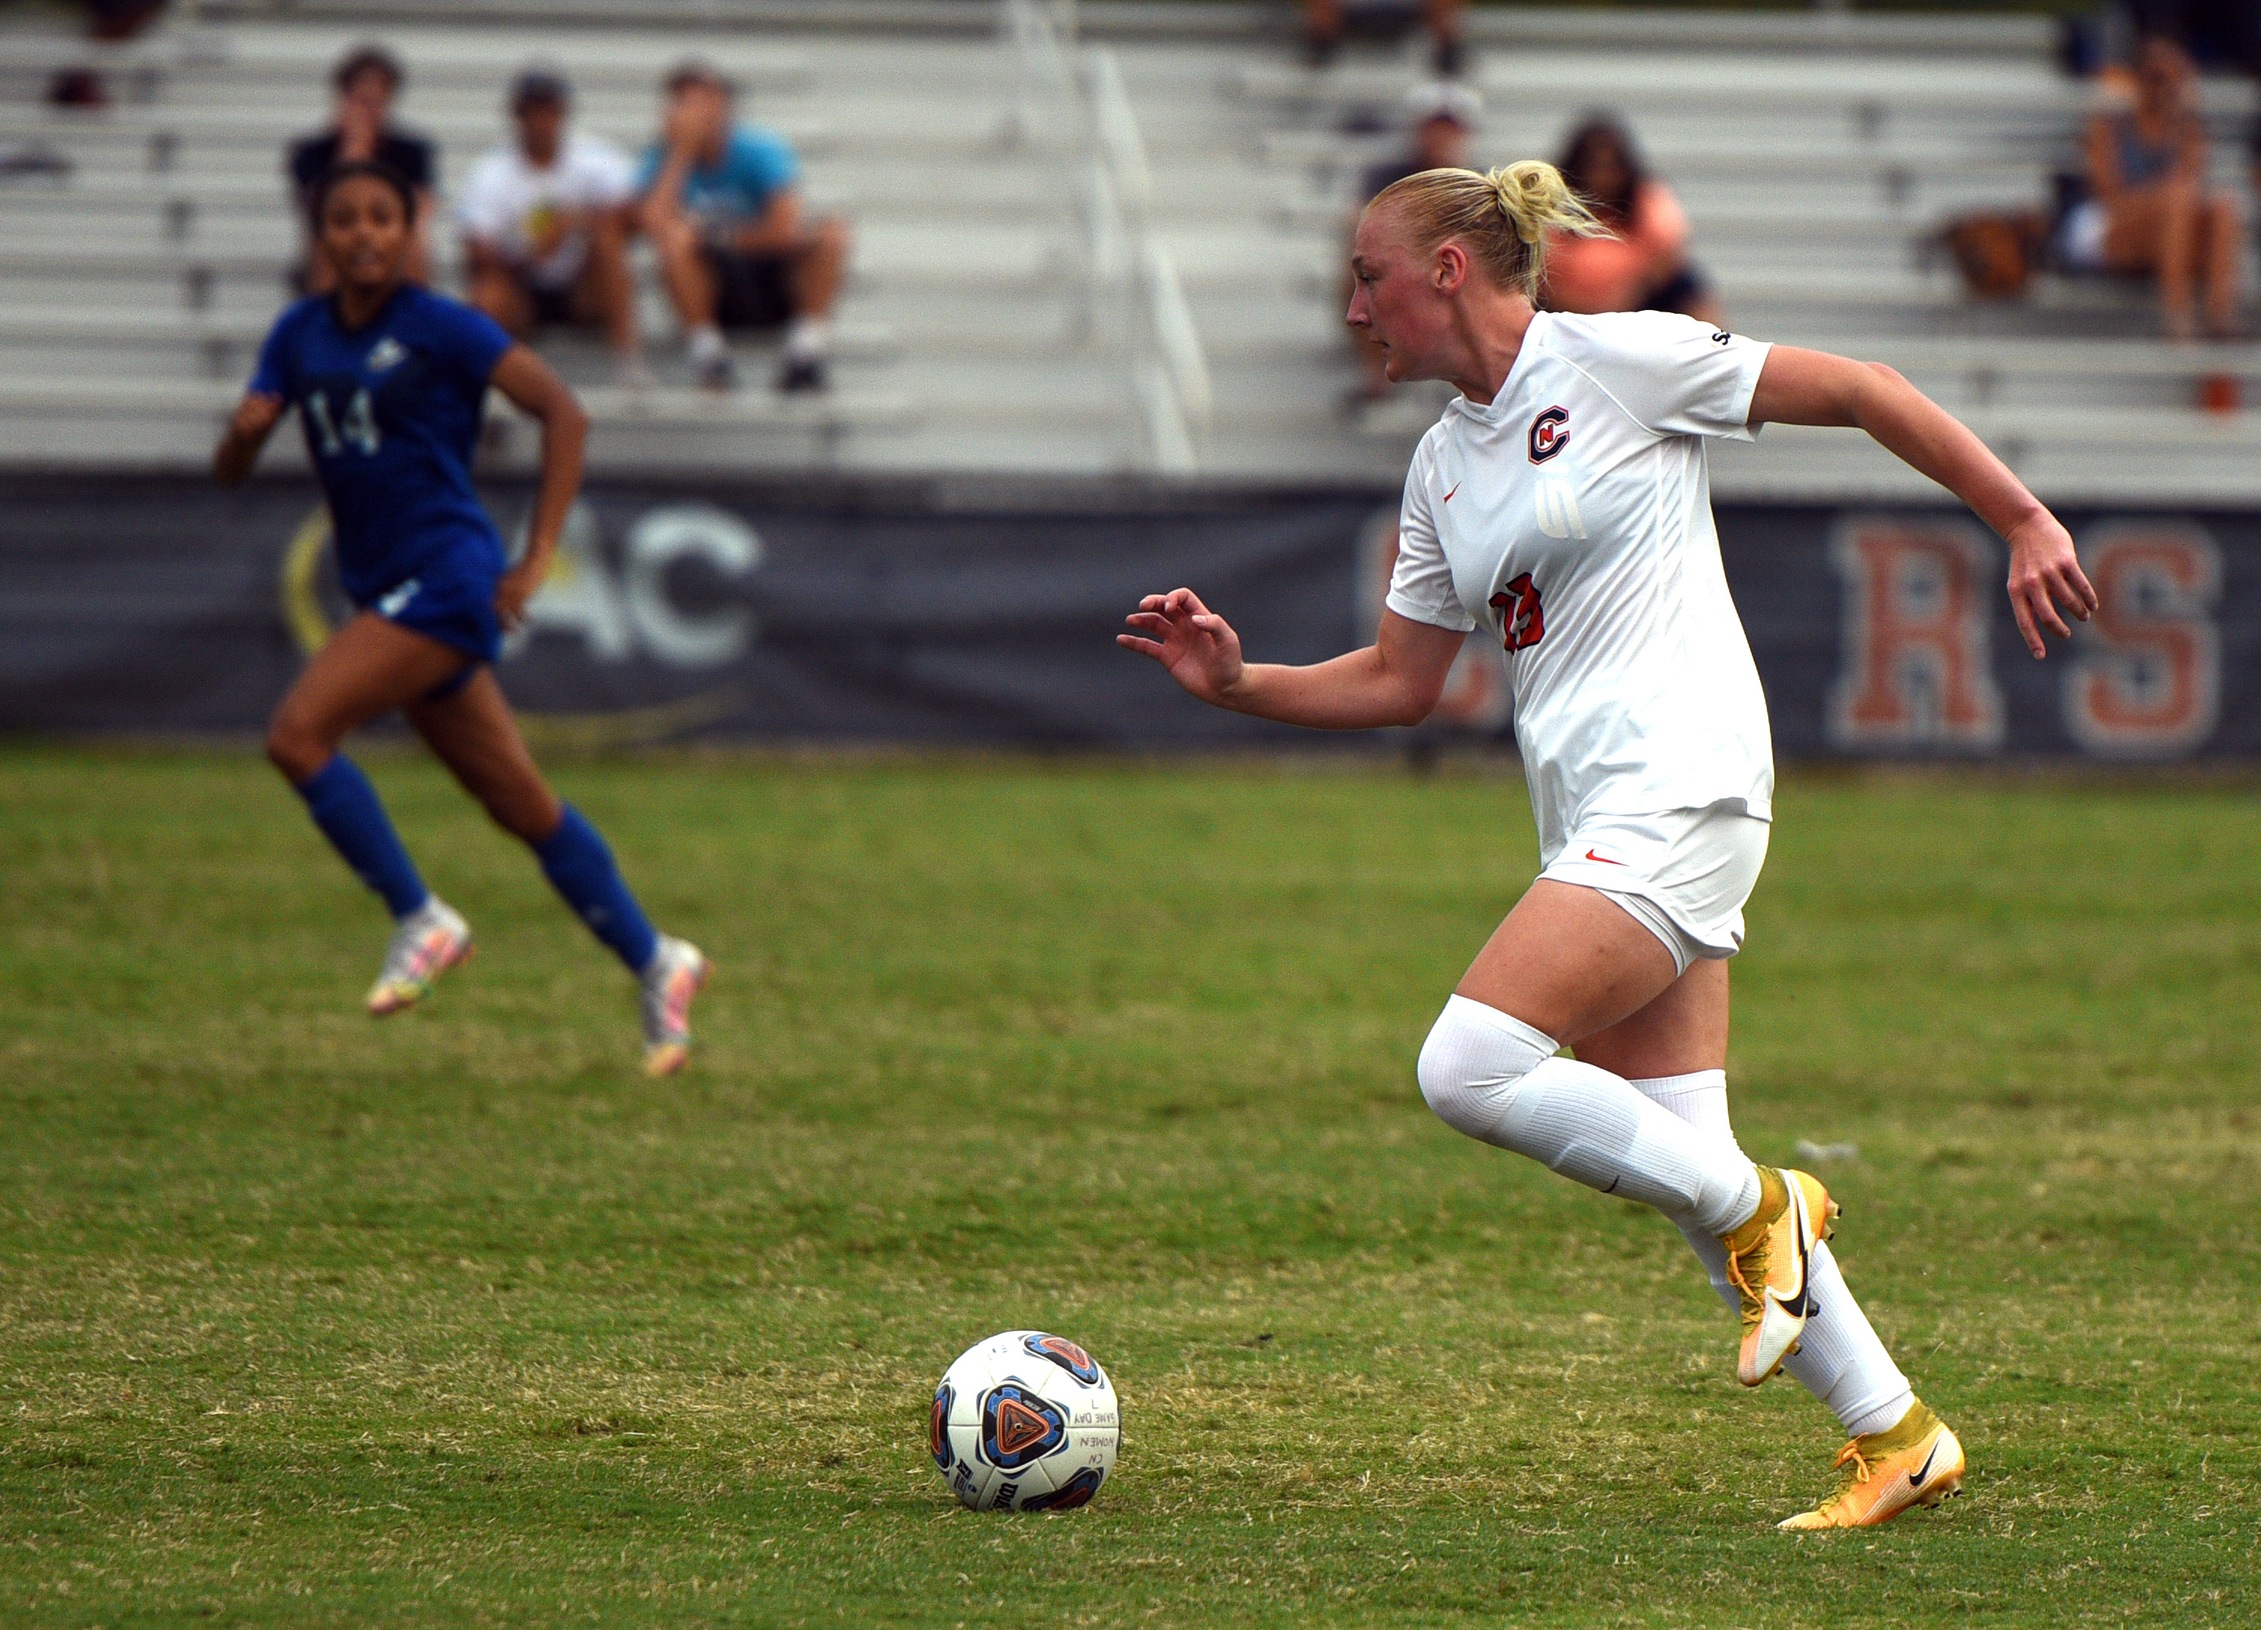 Eagles fall to Cedarville in season opener